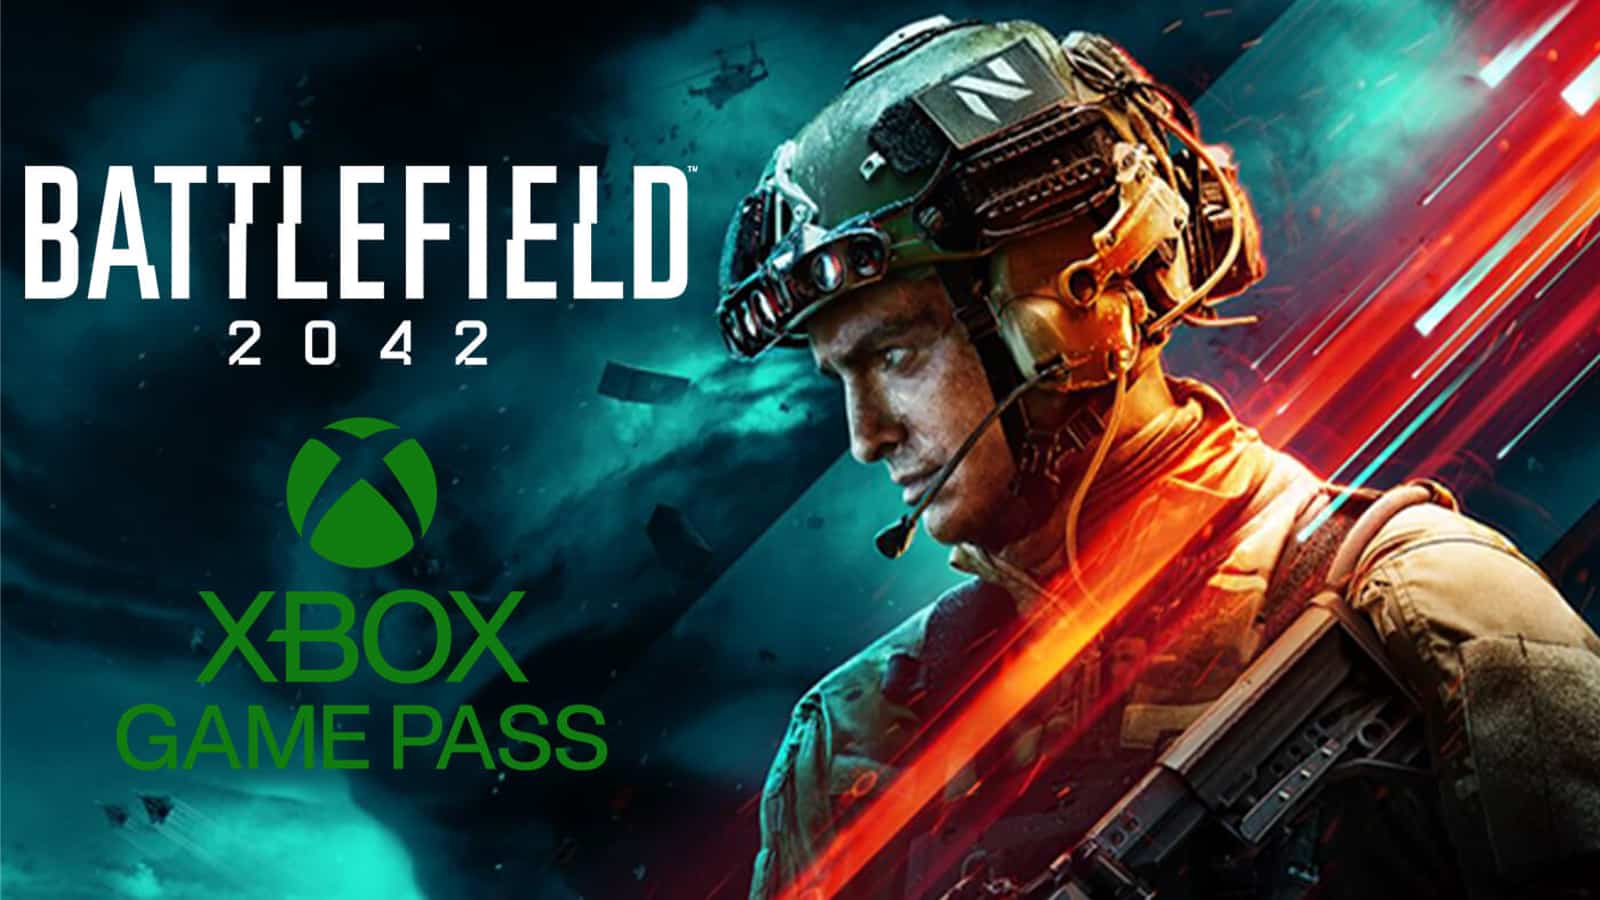 Battlefield 2042 Headed to Xbox Game Pass Ultimate and EA Play